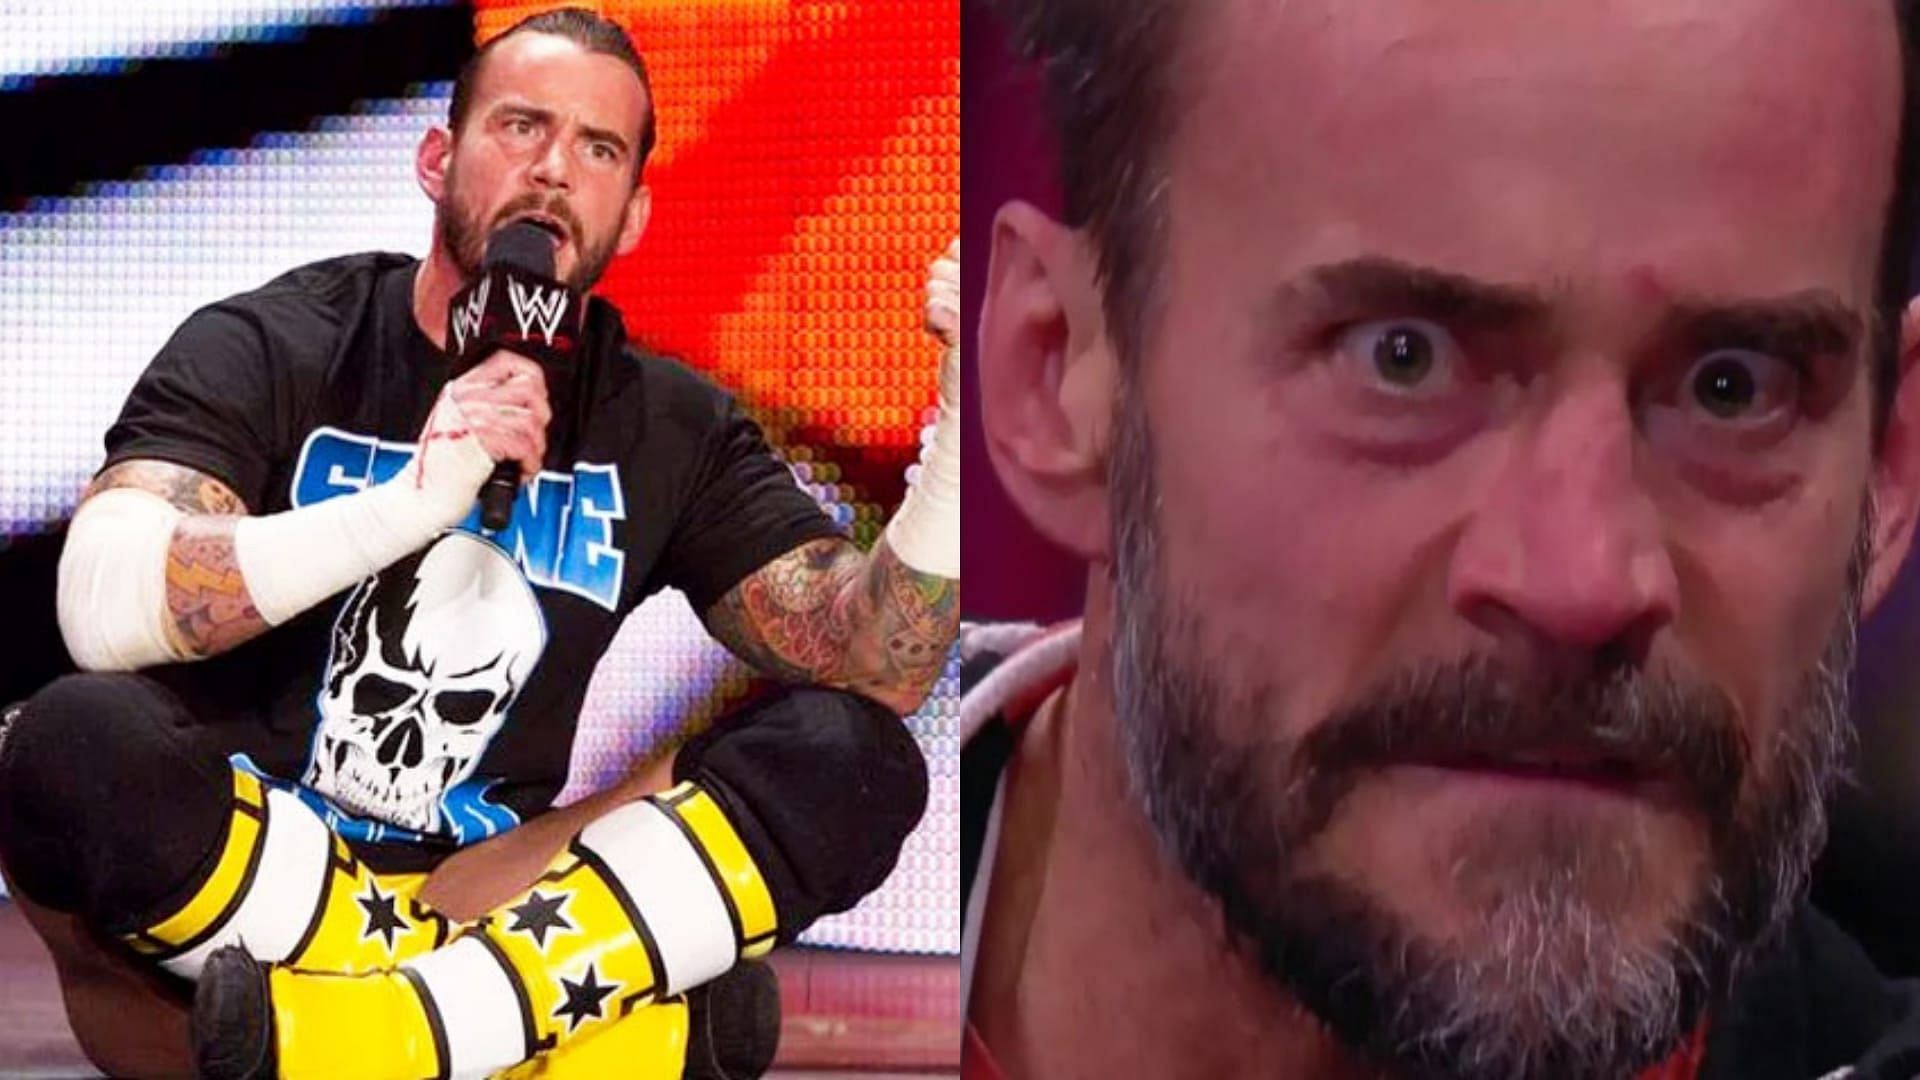 CM Punk launched an expletive-filled retort on social media when a fan questioned him